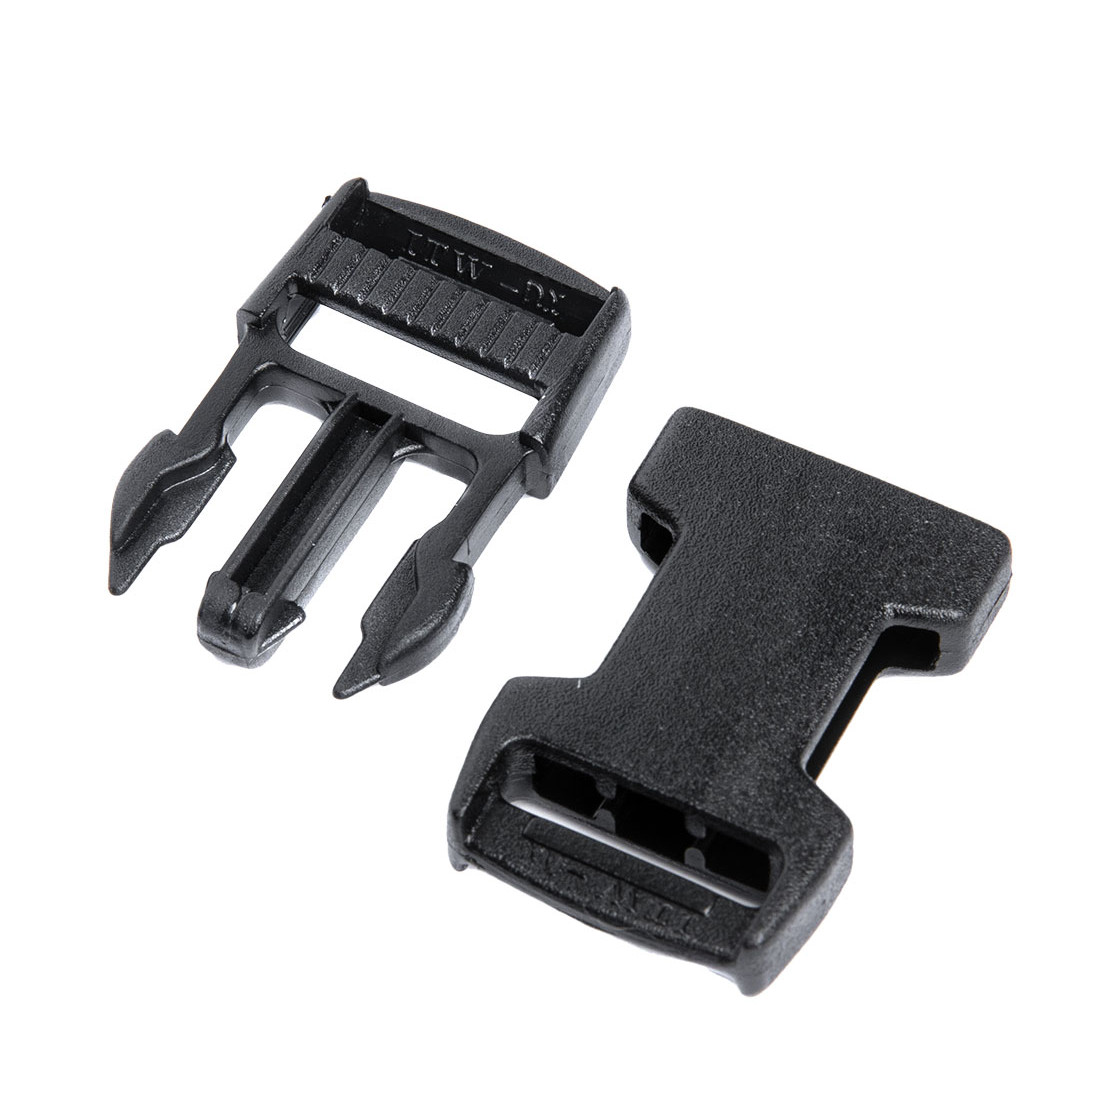 Metal Side Release Buckles 3/4 inch 20 mm Black Tactical Buckles for DIY Backpack Bag Replace Buckles Hand Craft Accessories 